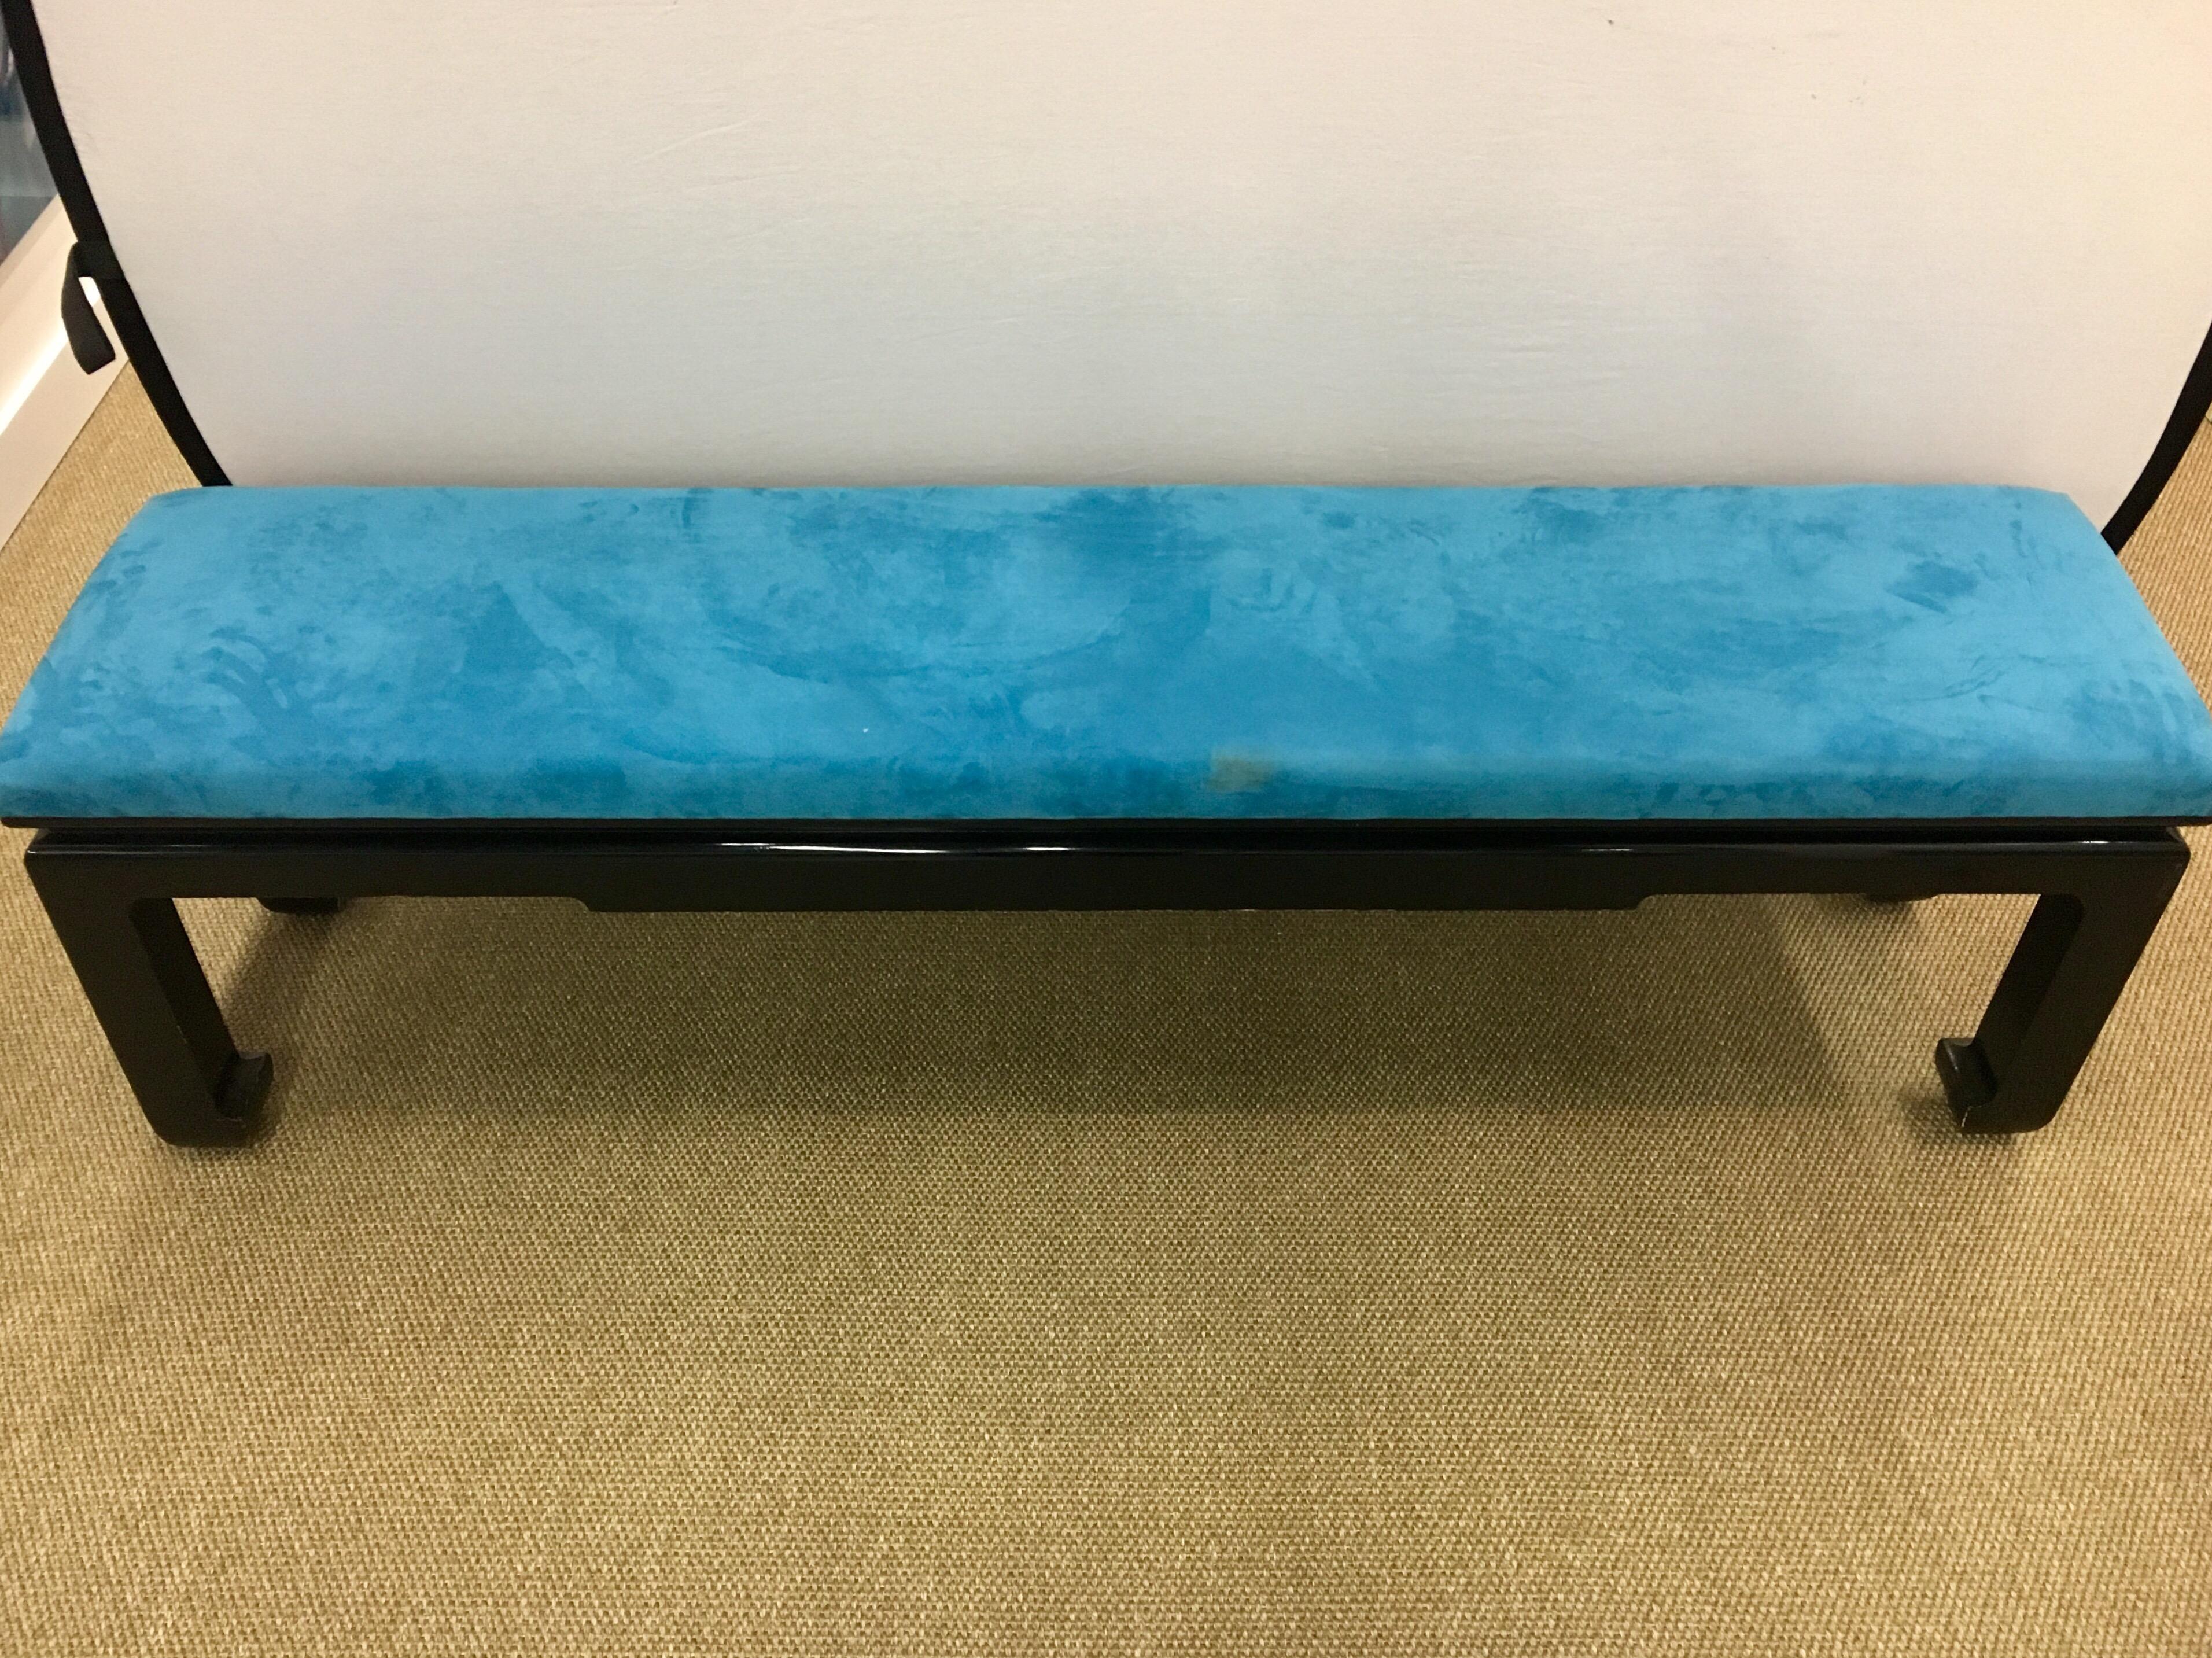 Classic long James Mont black lacquer wood bench with blue upholstery.